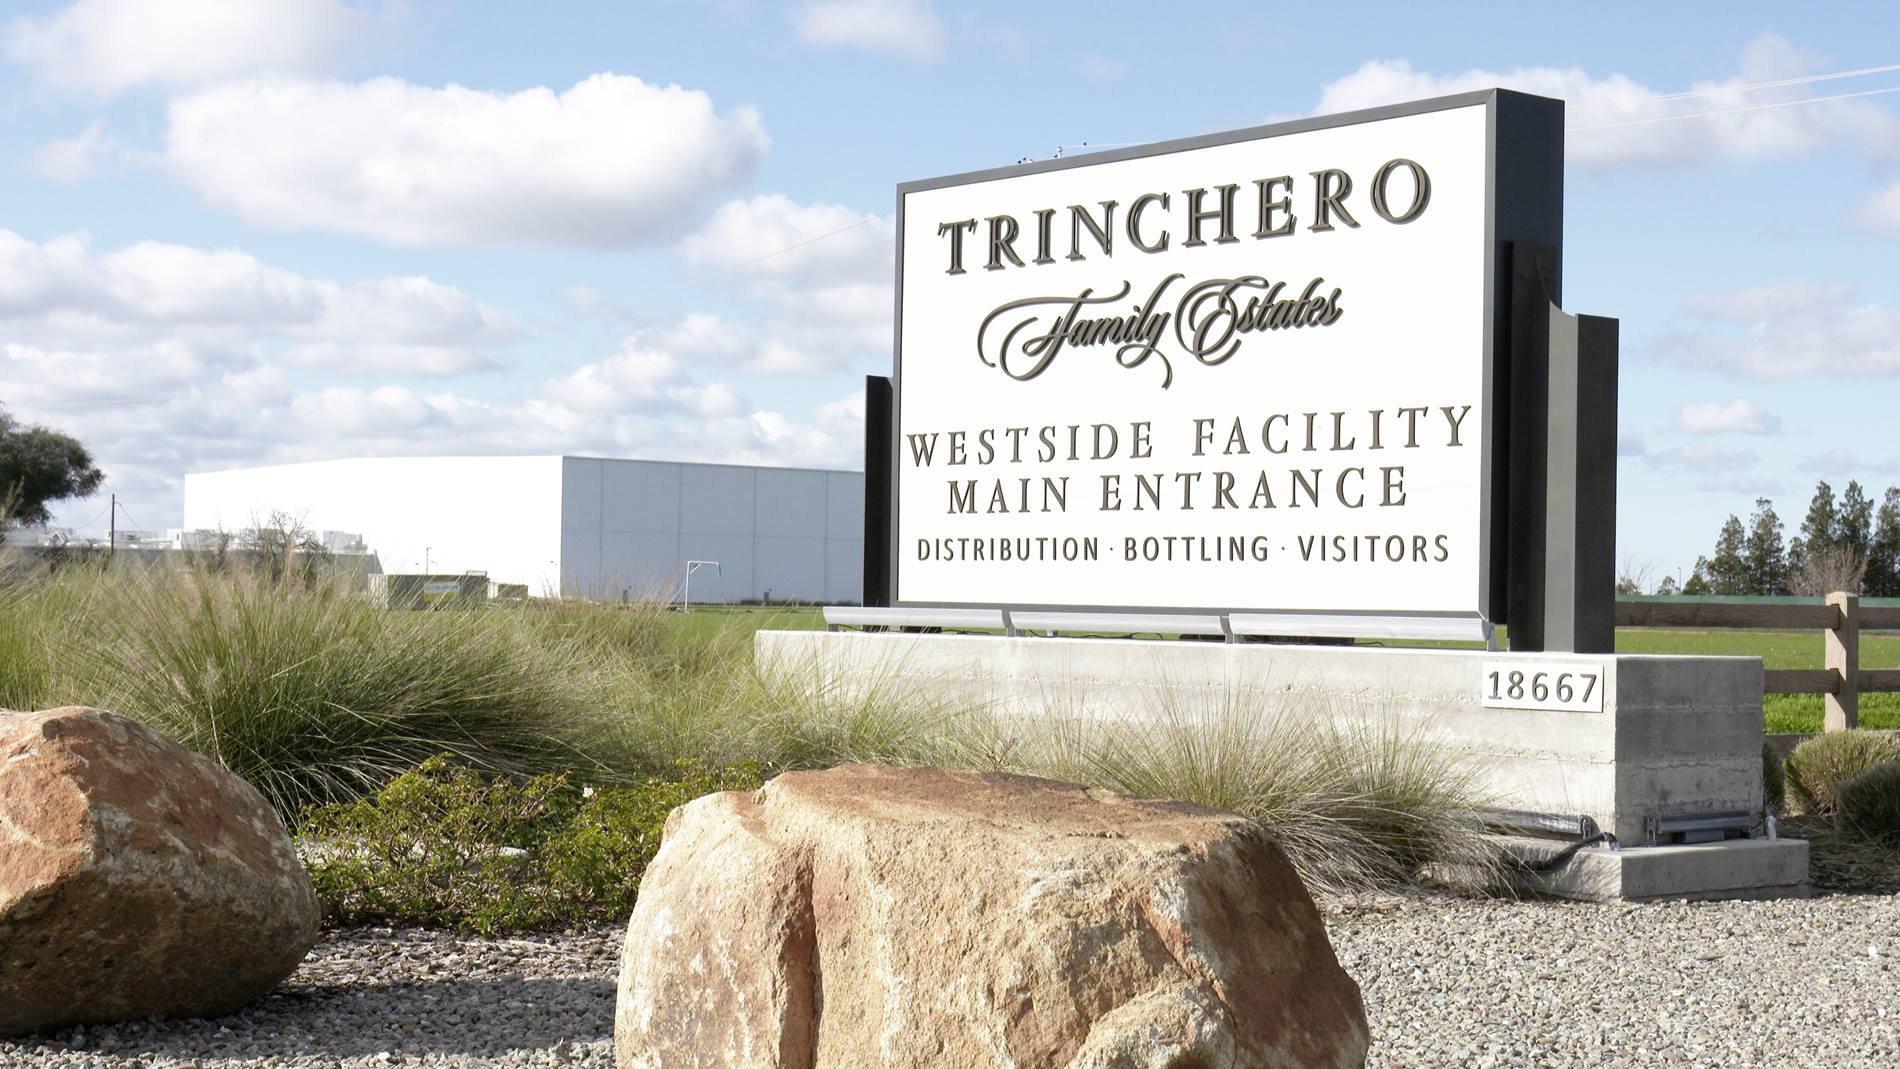 Trinchero Family Estates is moving 249 pallets per hour in and out of storage.